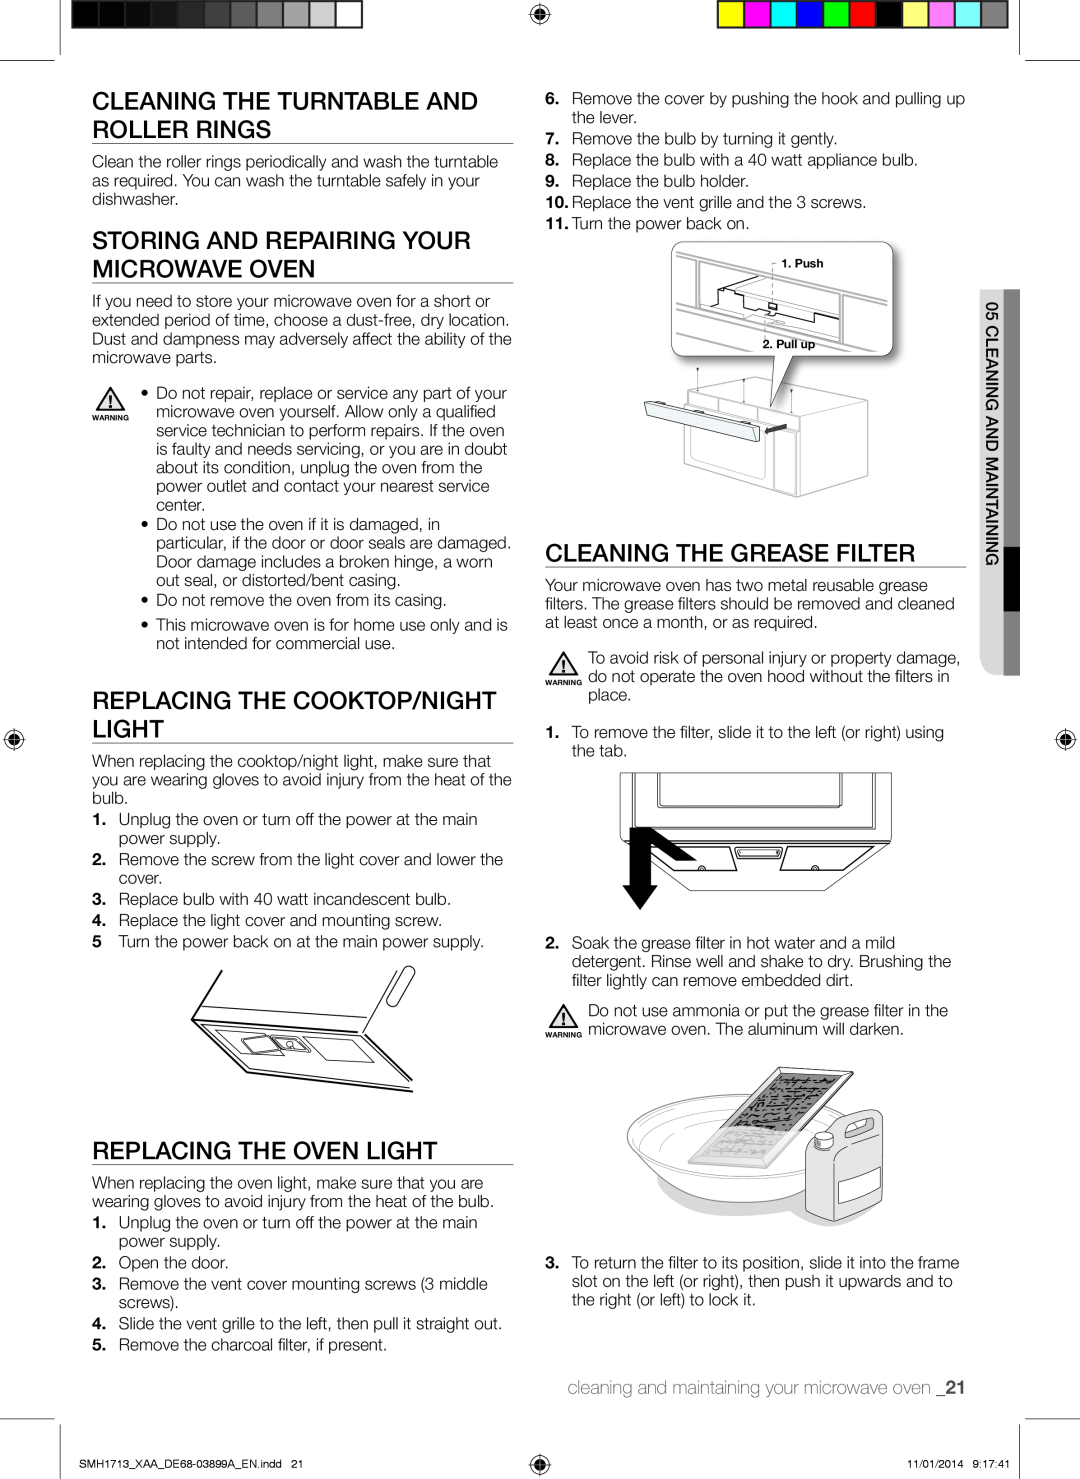 Samsung SMH1713 user manual Cleaning the turntable and roller rings, Storing and repairing your microwave oven 